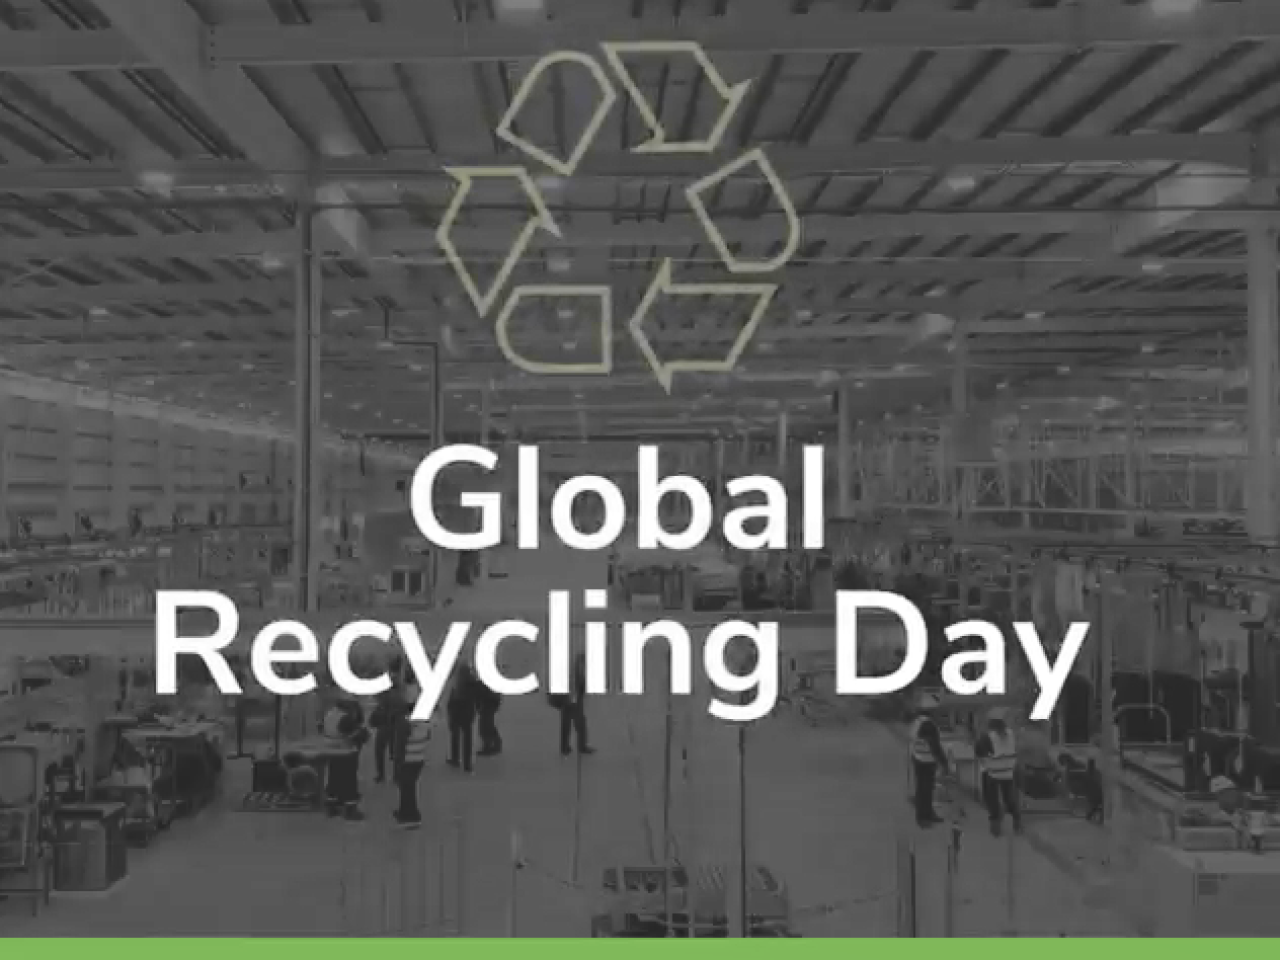 "Global Recycling Day" and whirlpool logo.